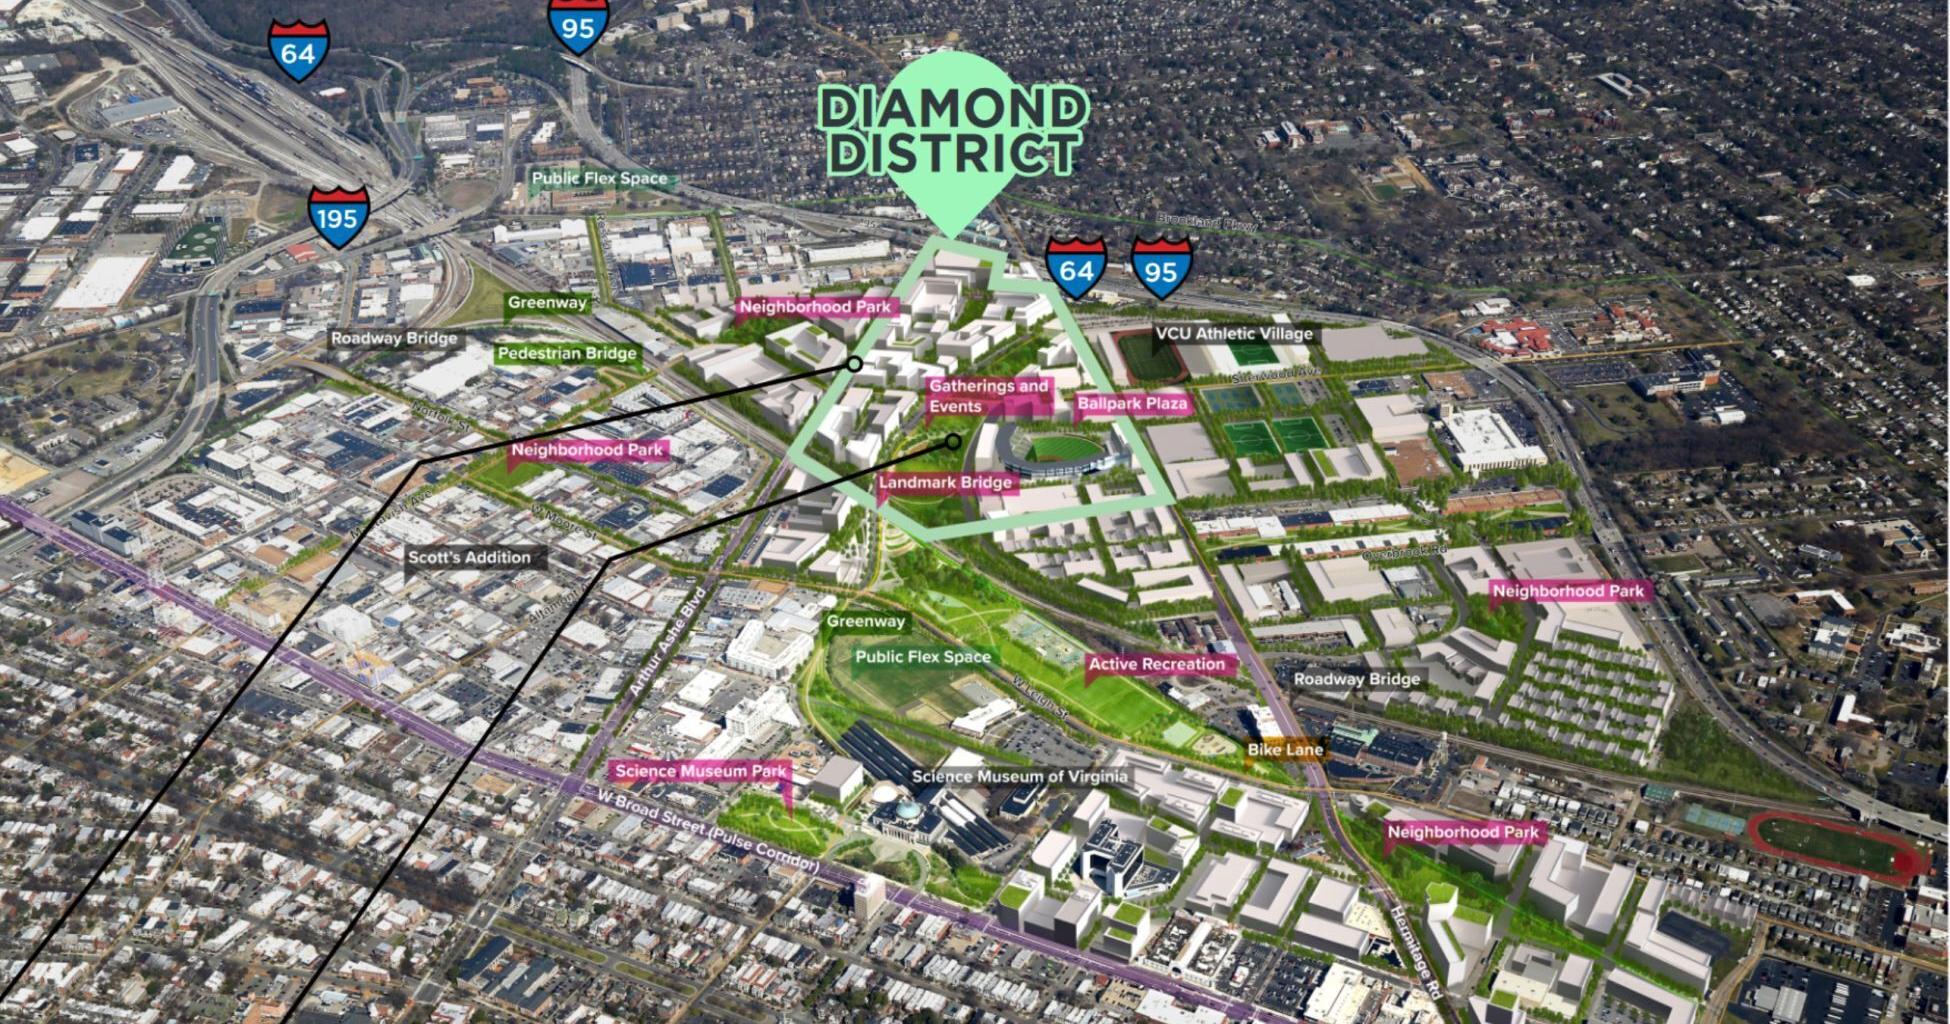 Richmond eliminates one of 3 finalists for Diamond District project